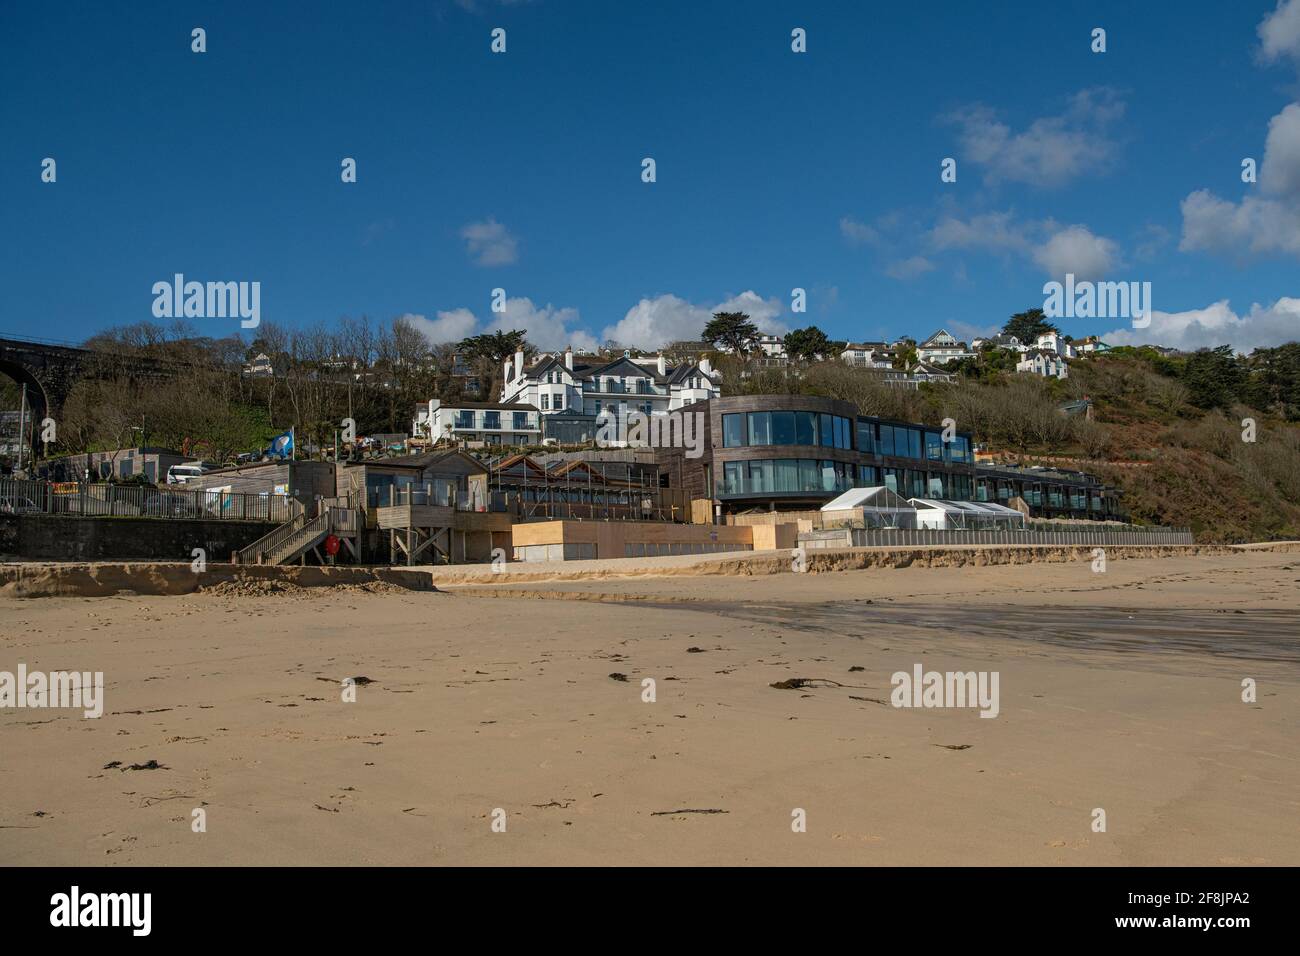 G7,St. Ives Cornwall, Cornish beach ,G7 summit of world leaders in June,huge disruption around Newquay airport and Falmouth Stock Photo